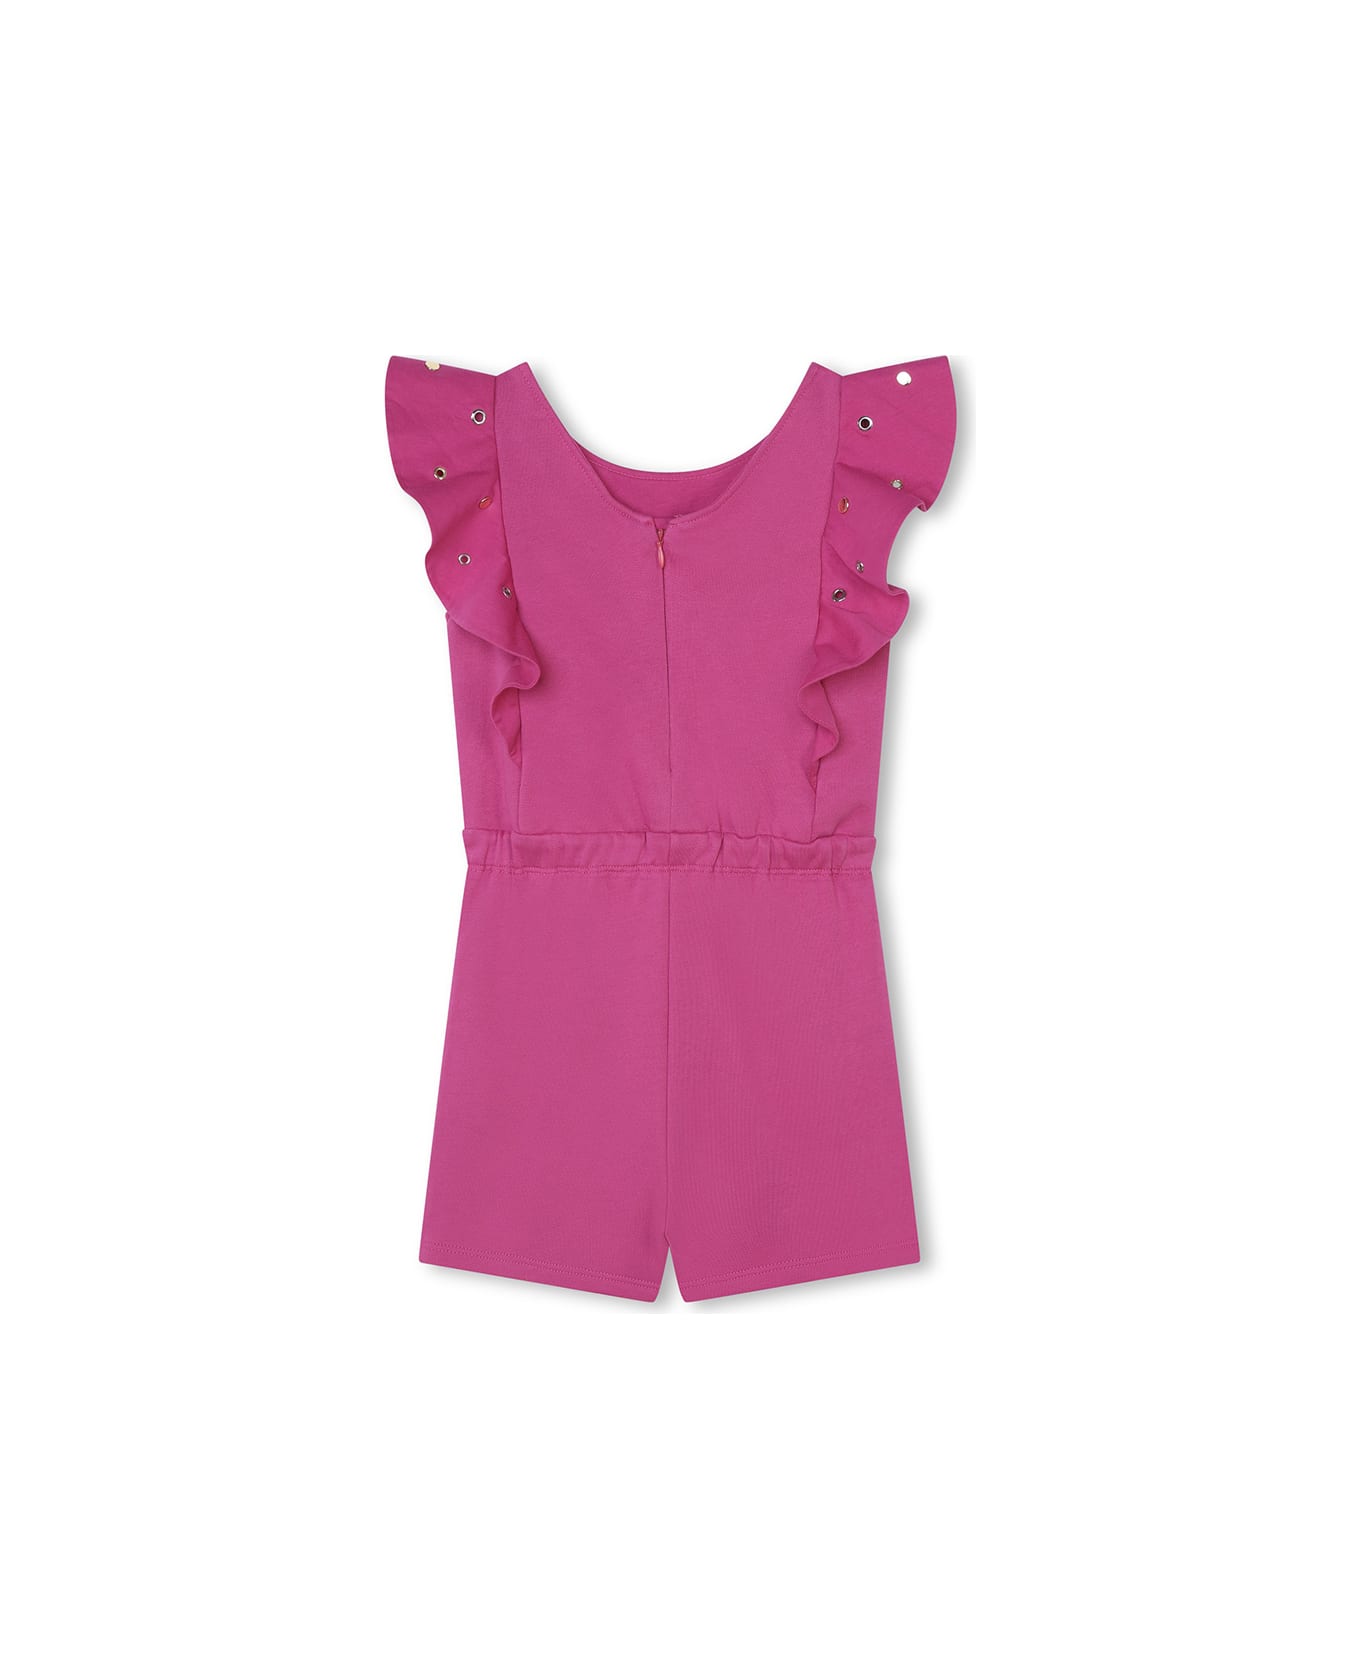 Chloé Fuchsia Jumpsuit With Ruffles And Studs - Pink ワンピース＆ドレス